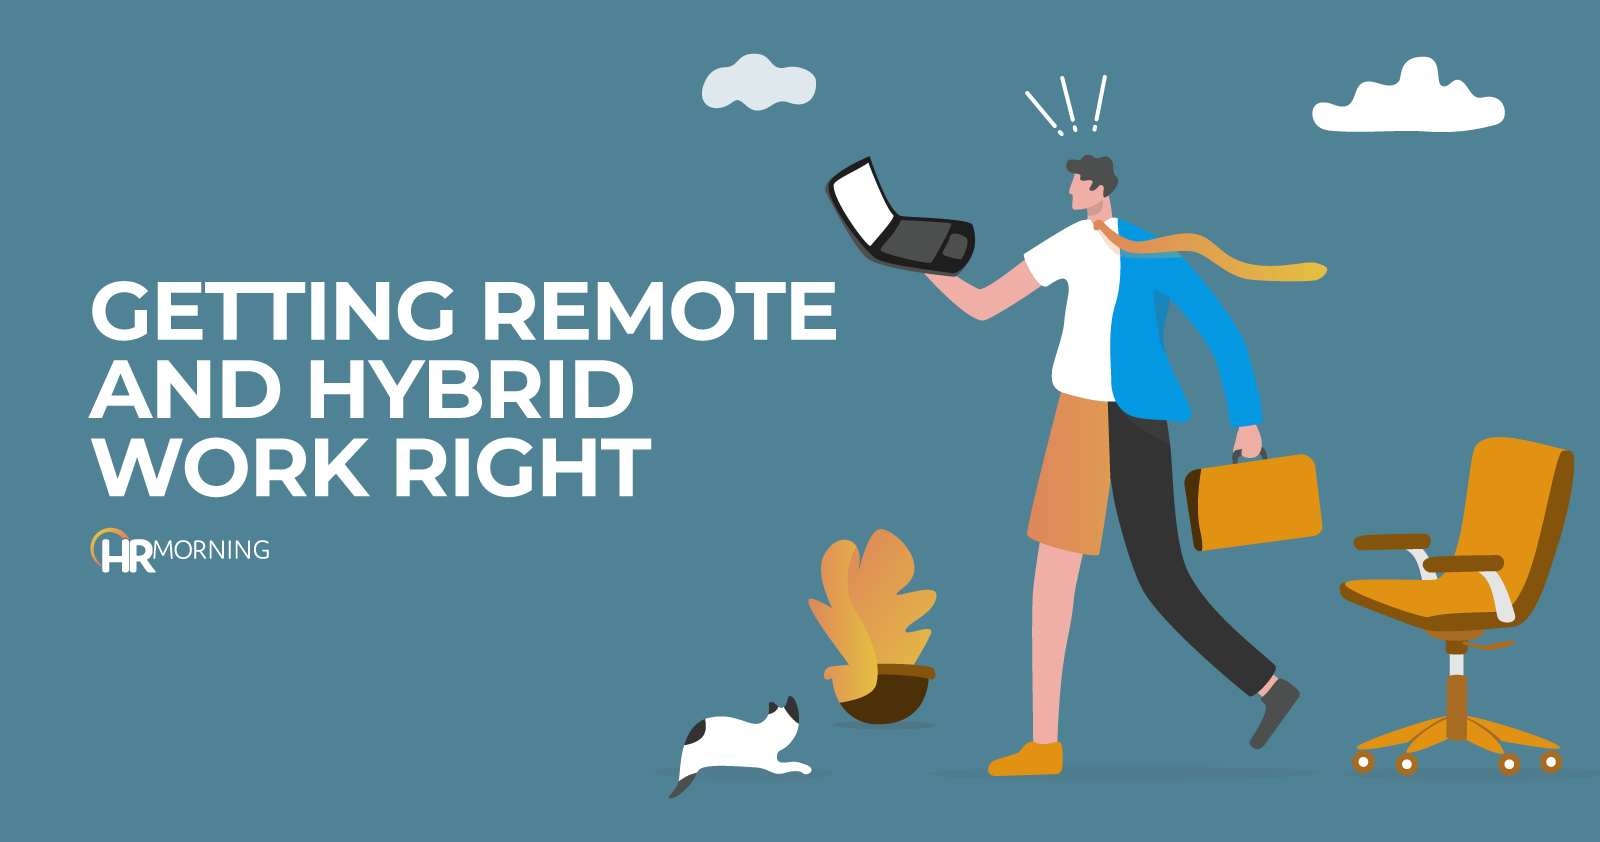 Getting remote and hybrid work right